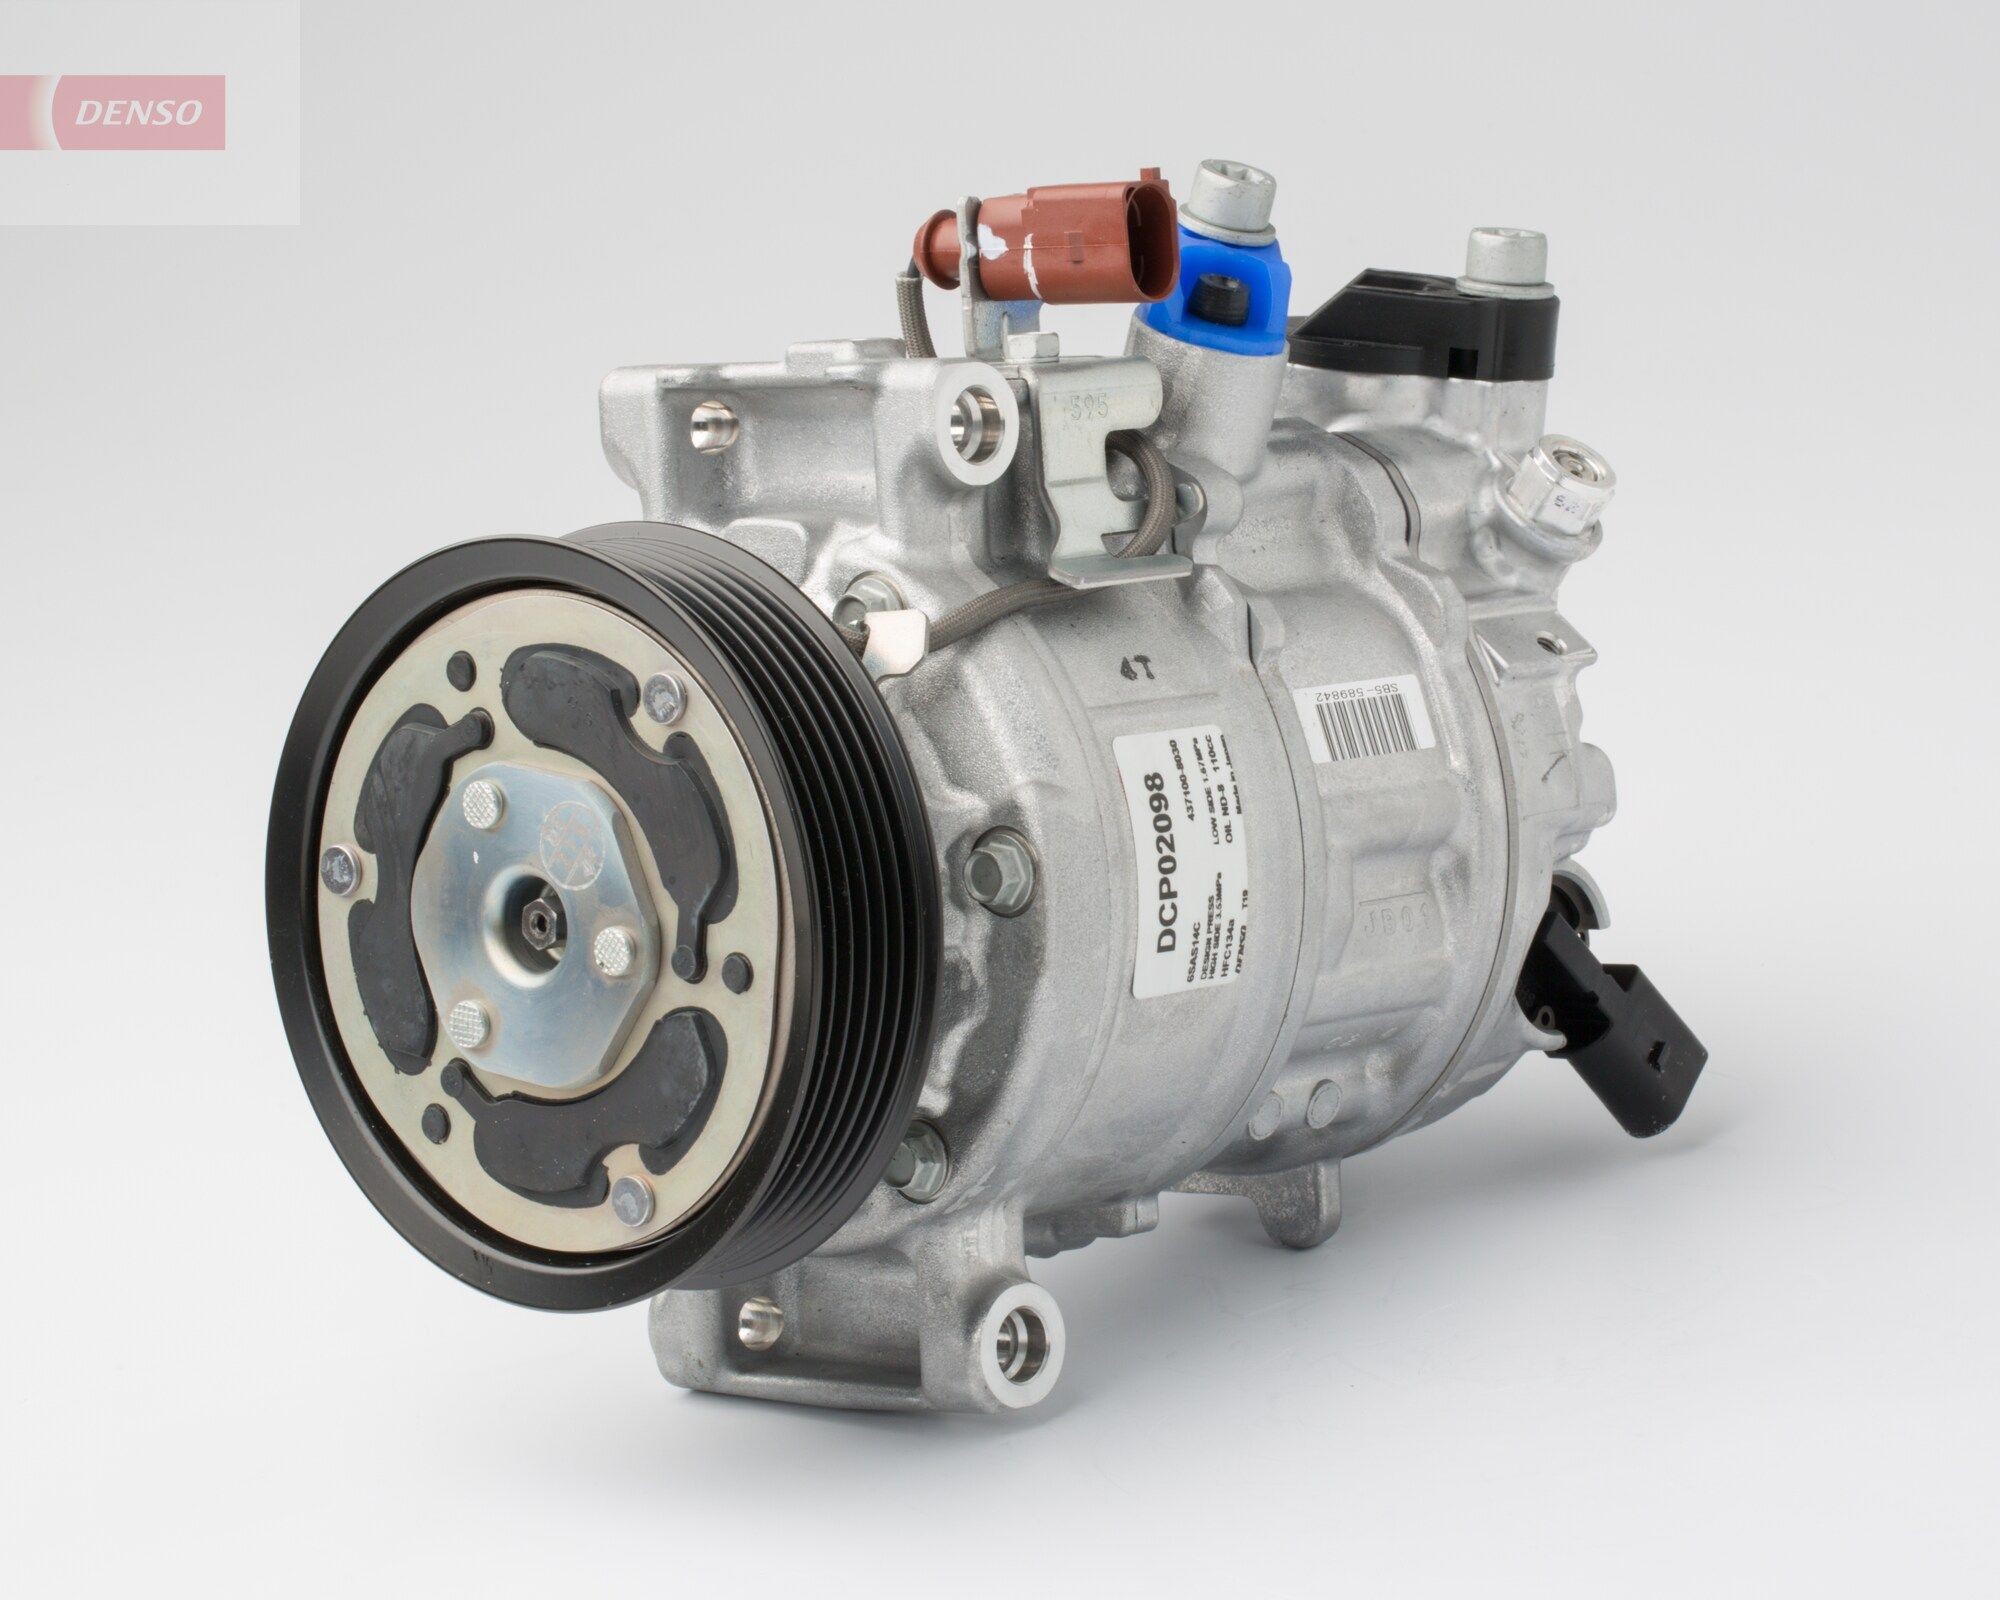 DCP17169 Compressor, air conditioning DCP17169 DENSO 6SBU16C, 12V, PAG 46, R 134a, with magnetic clutch